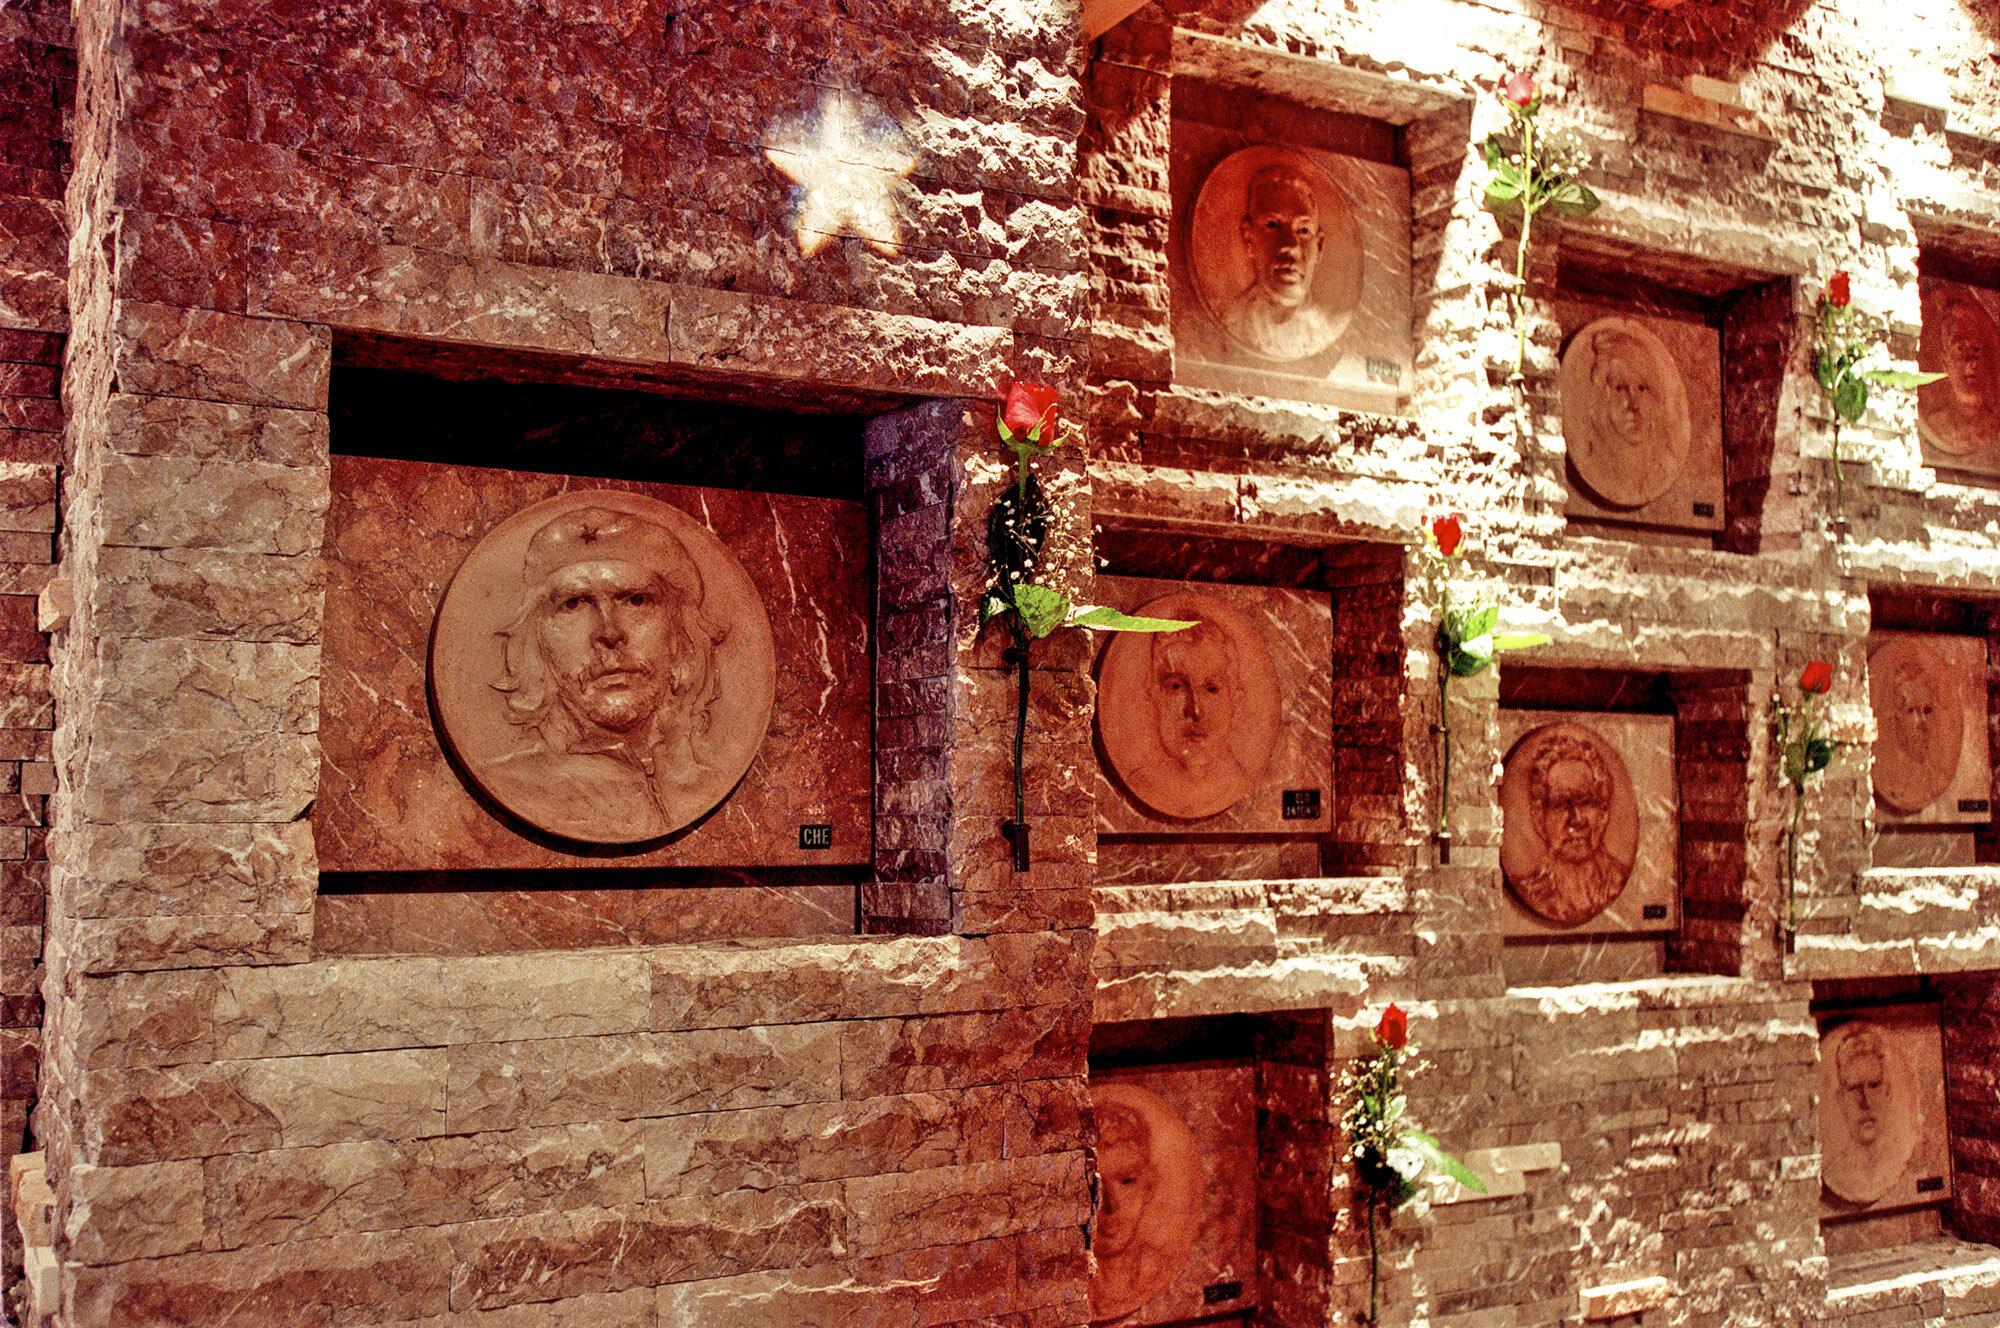  The remains of Che Guevara's and fellow guerilleros in the Santa Clara mausoleum 